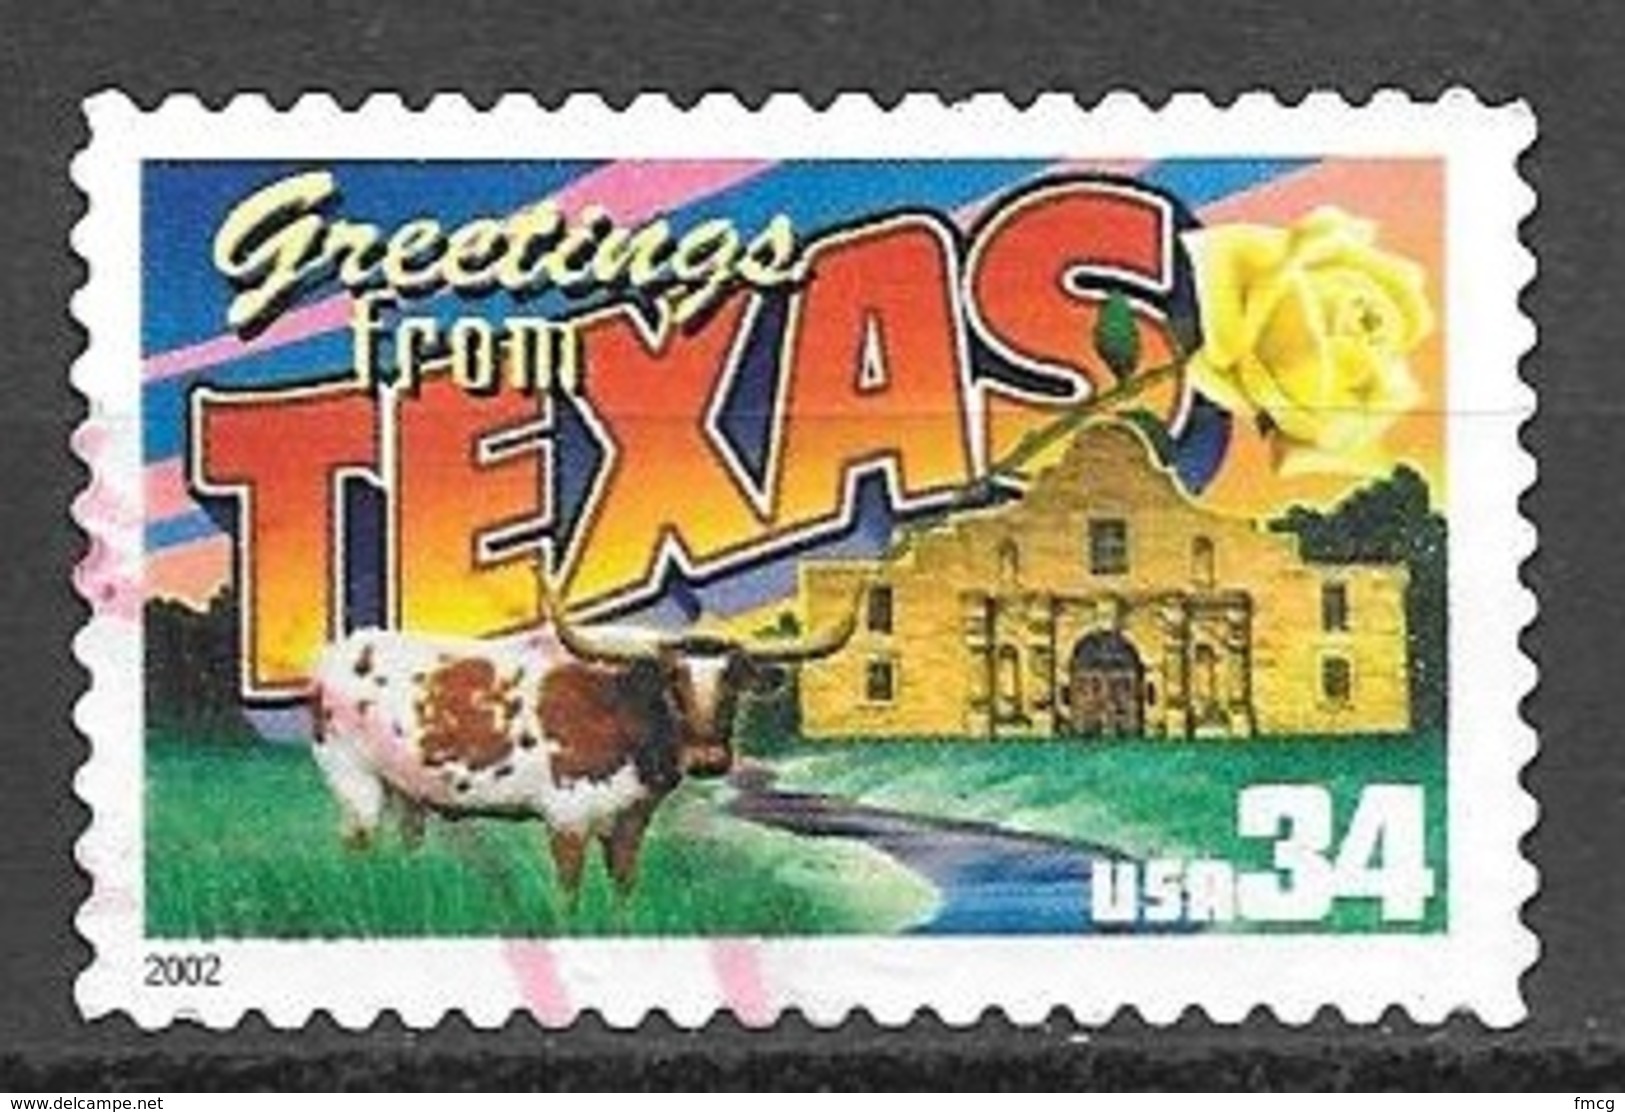 2002 34 Cents State Greetings, Texas, Used - Used Stamps